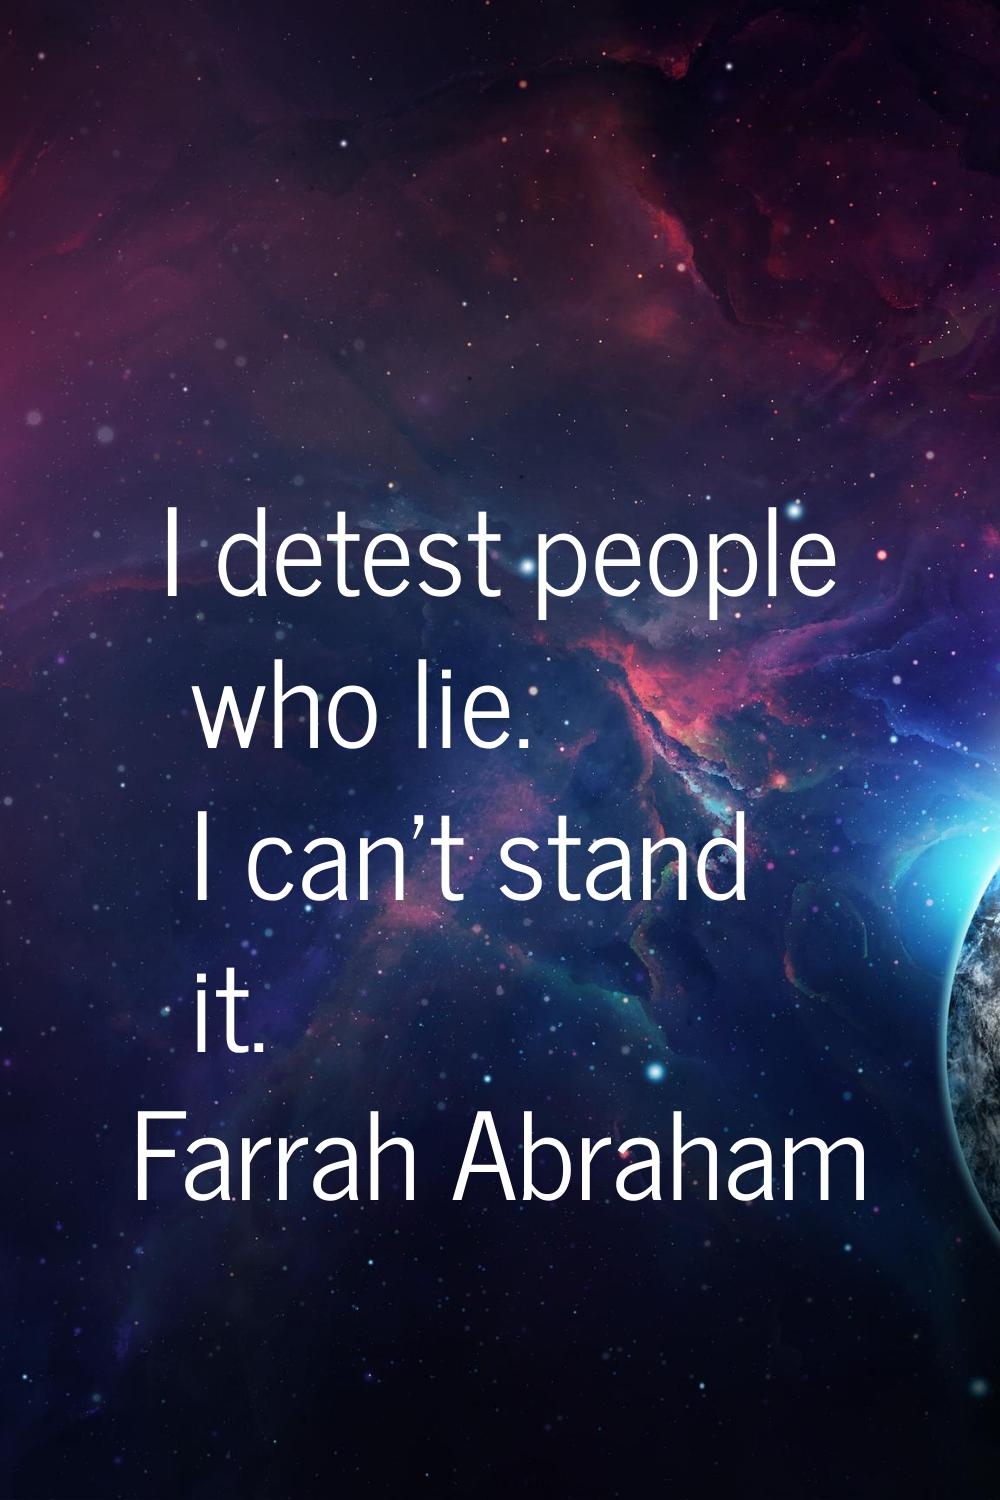 I detest people who lie. I can't stand it.